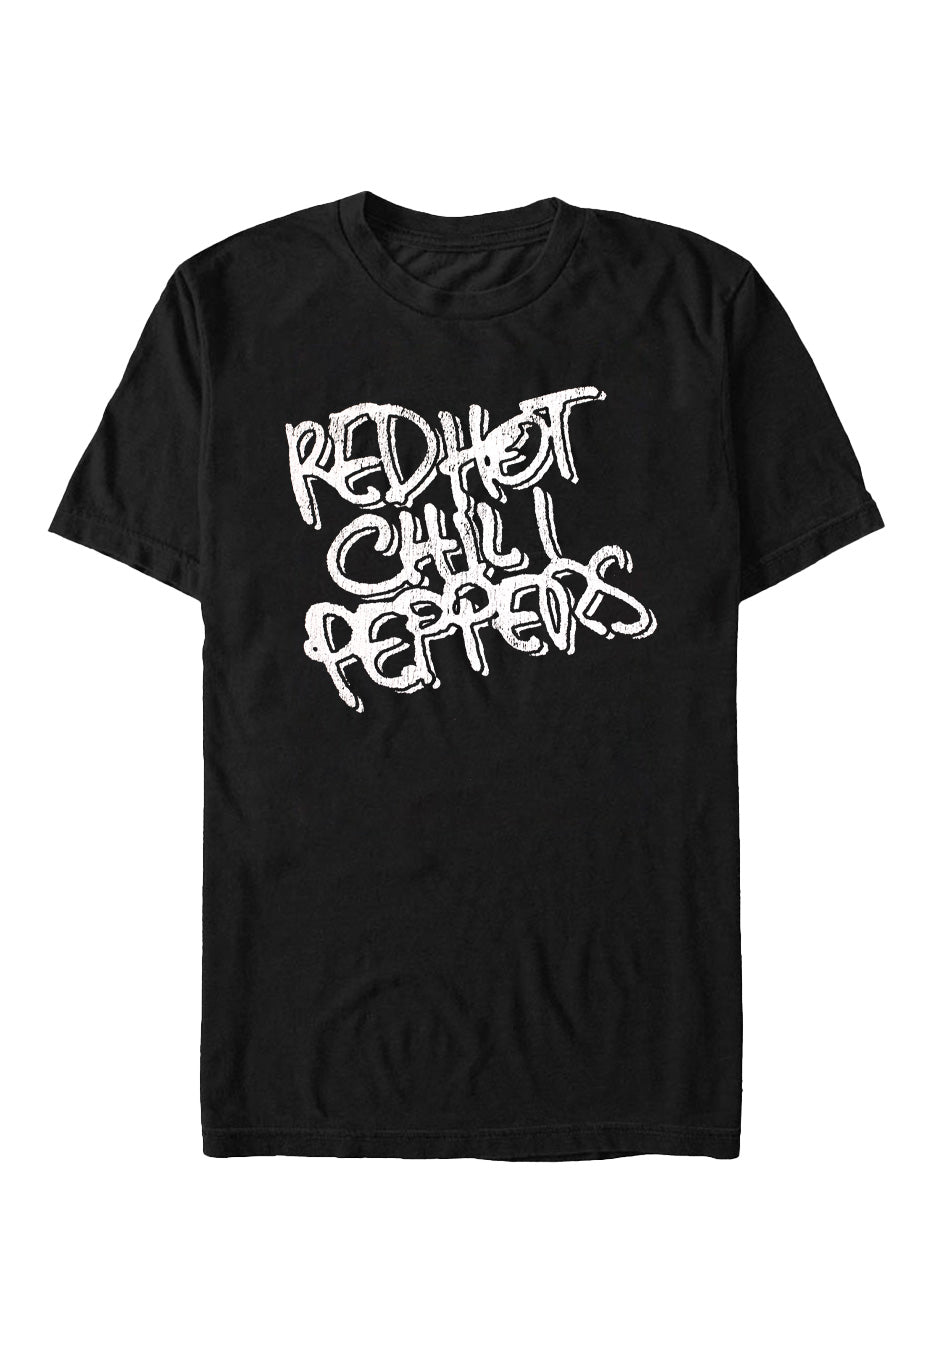 Red Hot Chili Peppers - Black & White Logo - T-Shirt